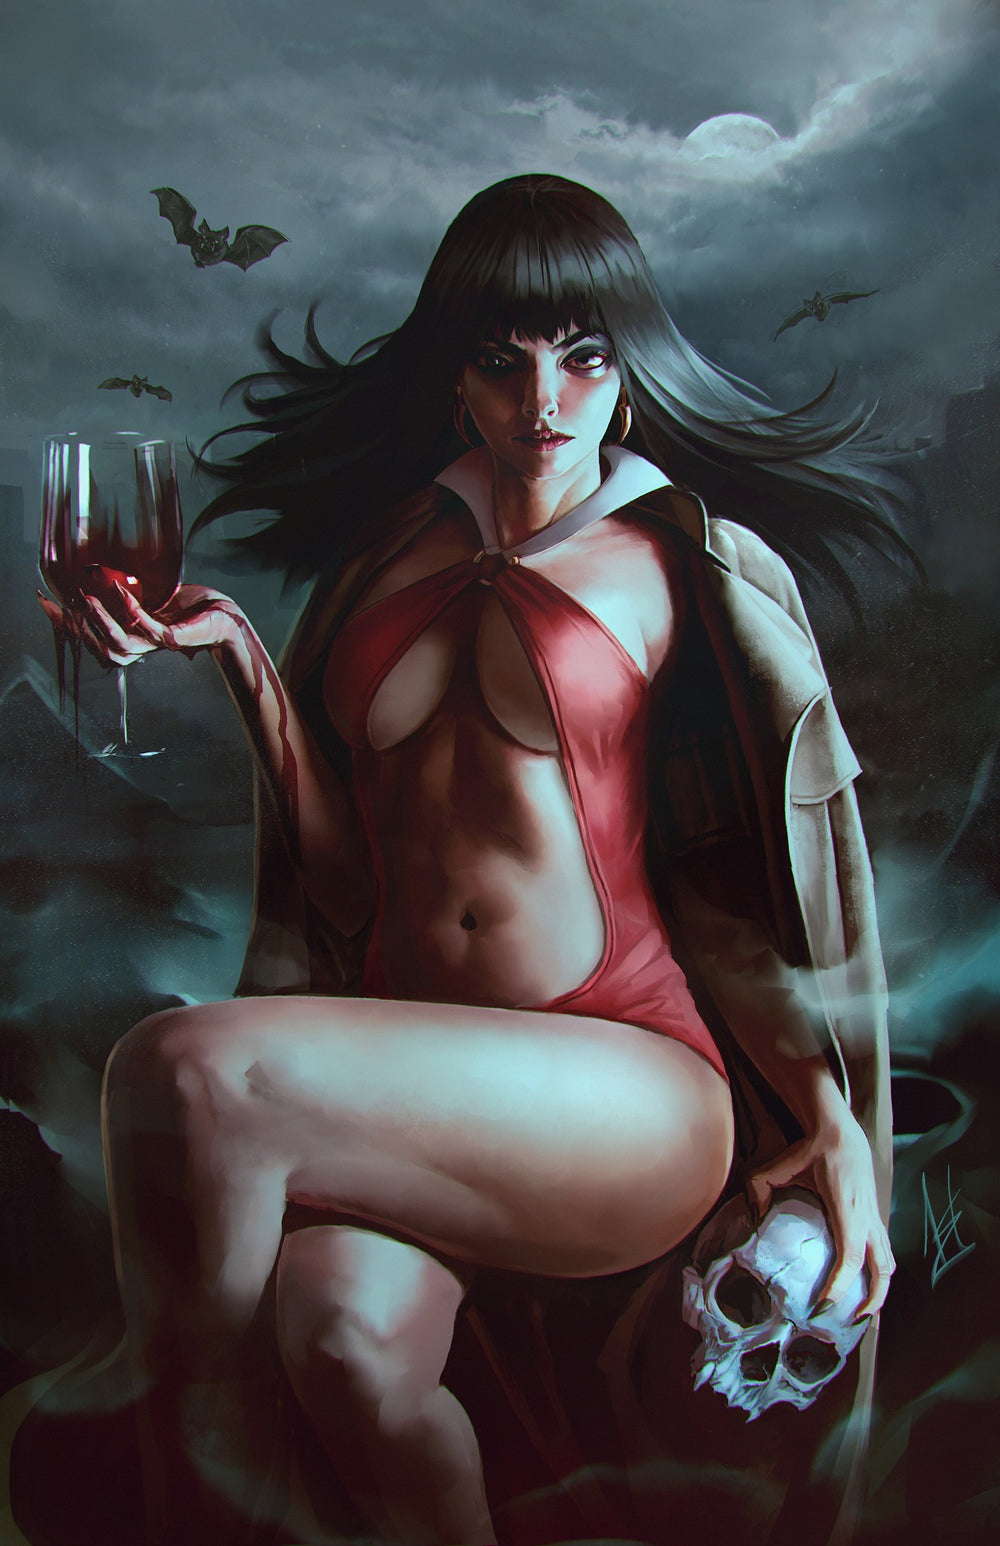 VAMPIRELLA vs SUPERPOWERS #1 Anna Marcano Exclusive! (Ltd to Only 500)